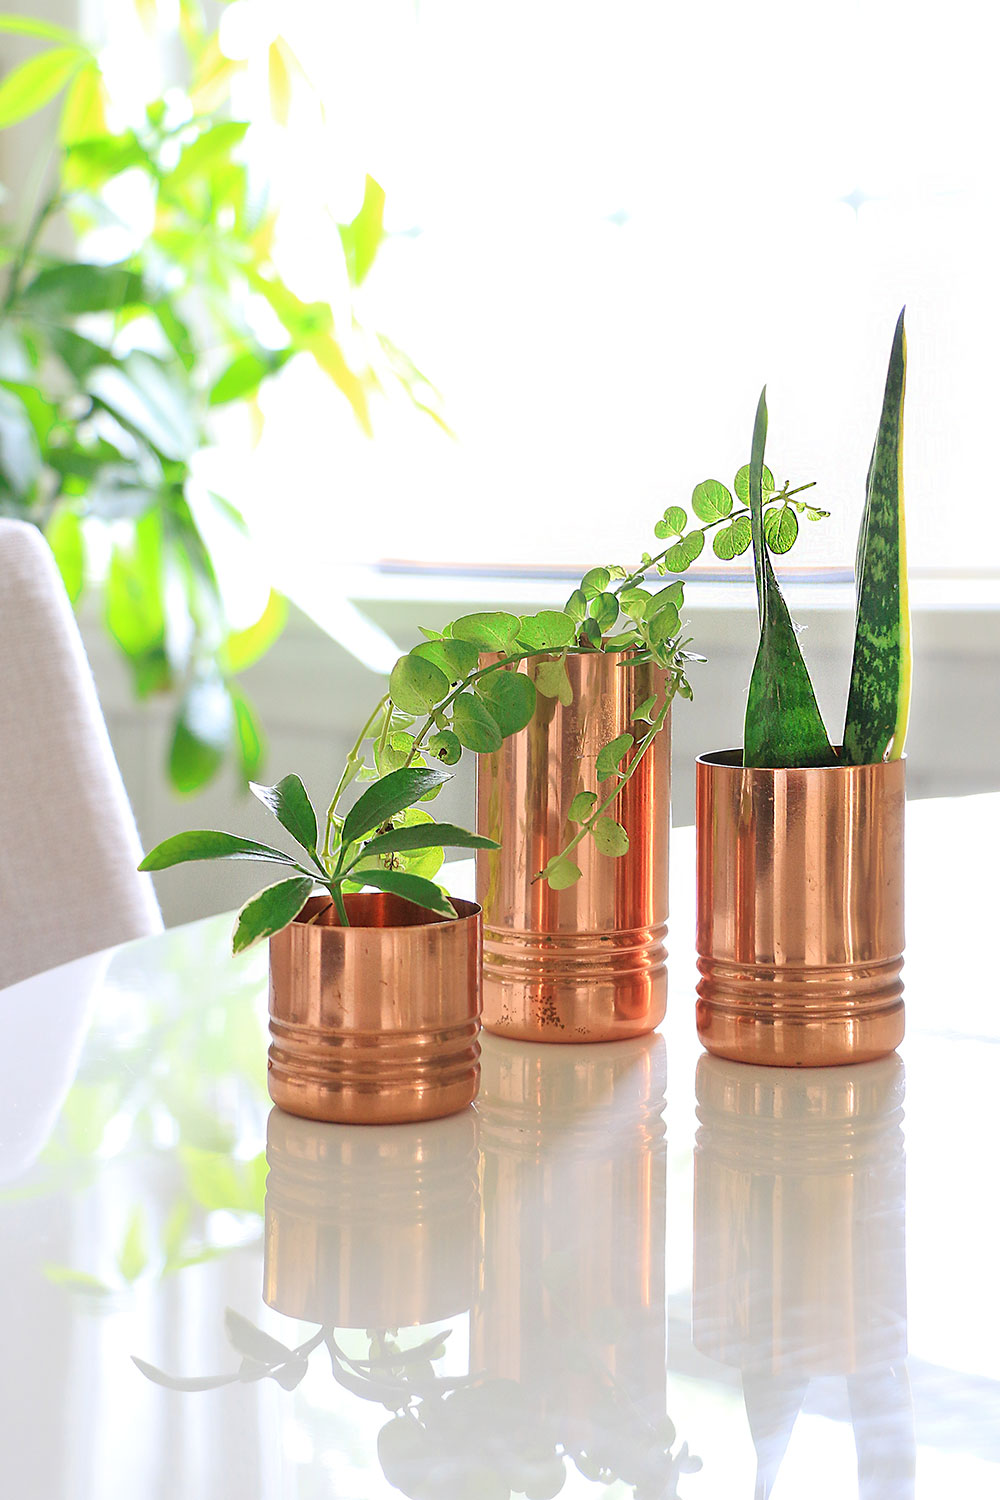 Copper-tins-with-plants